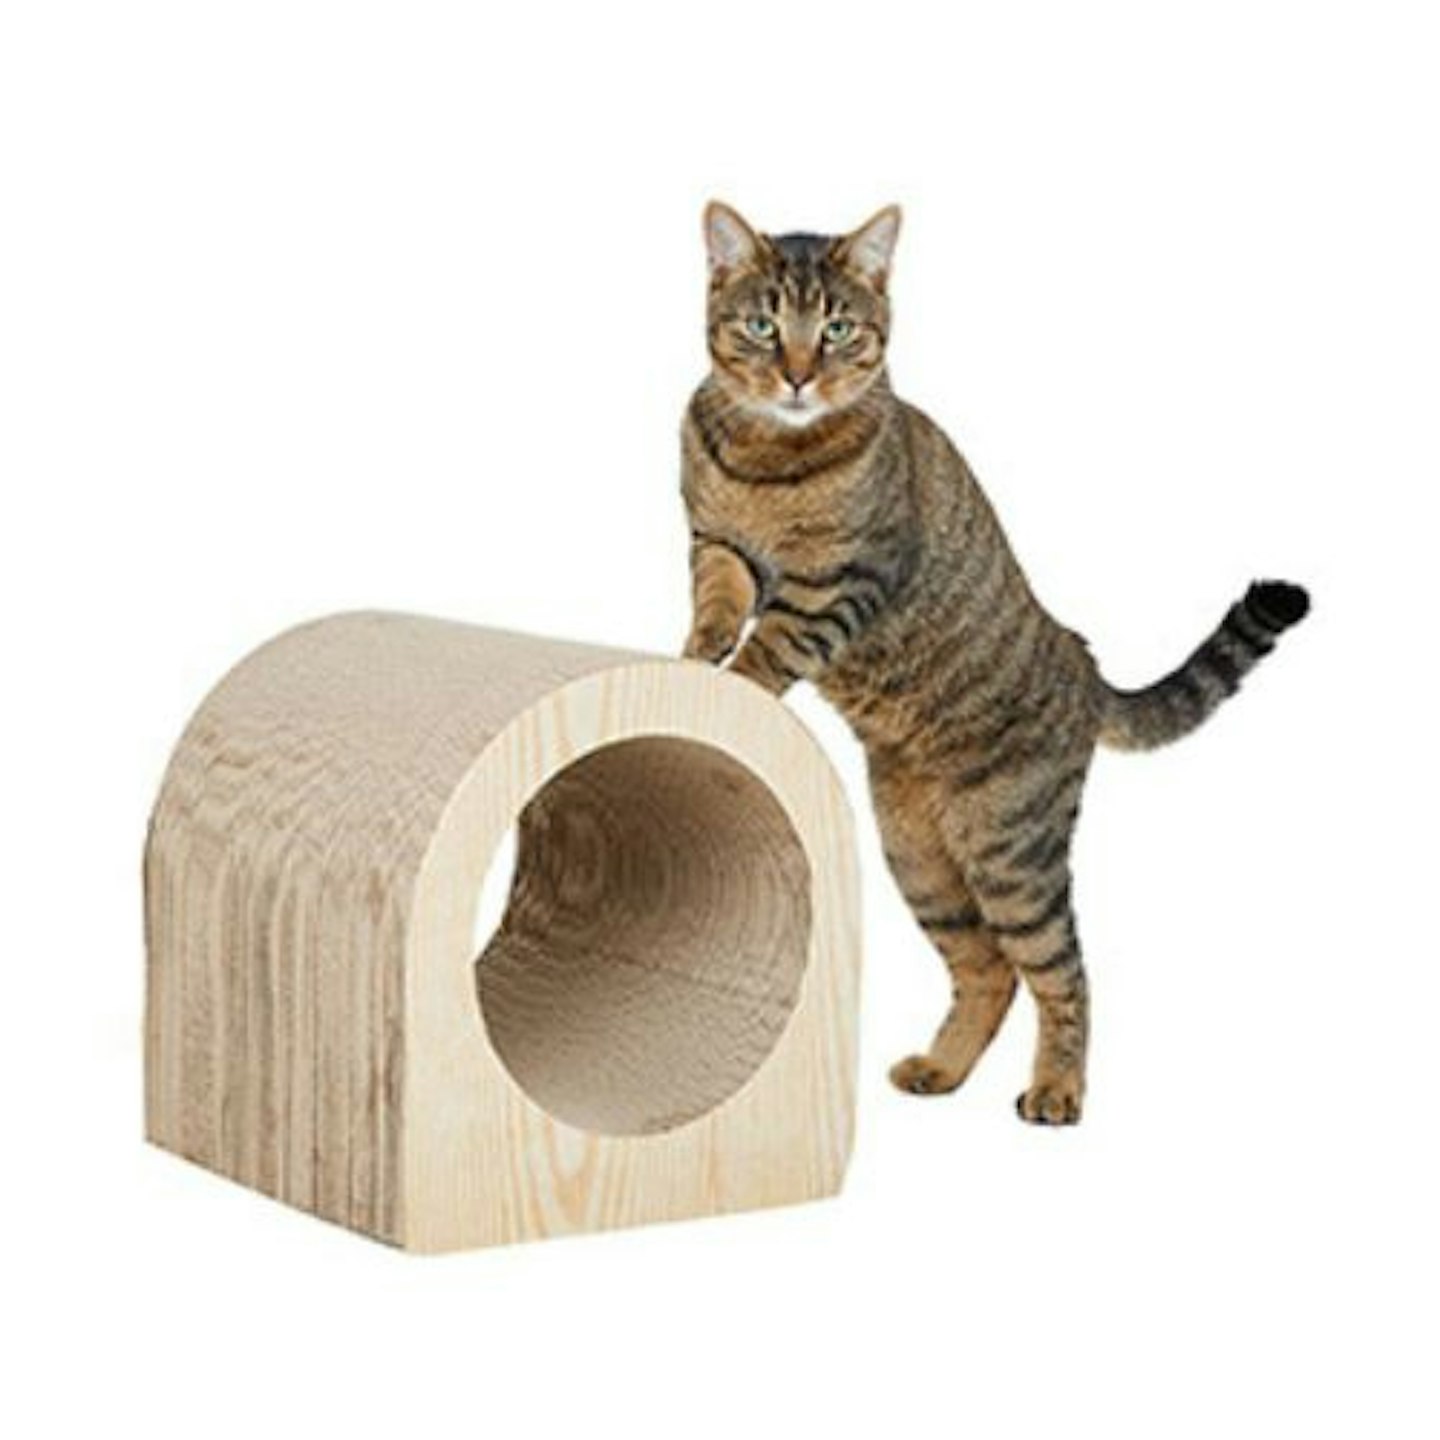 Willow's Scratch and Hide Cat Tunnel Toy